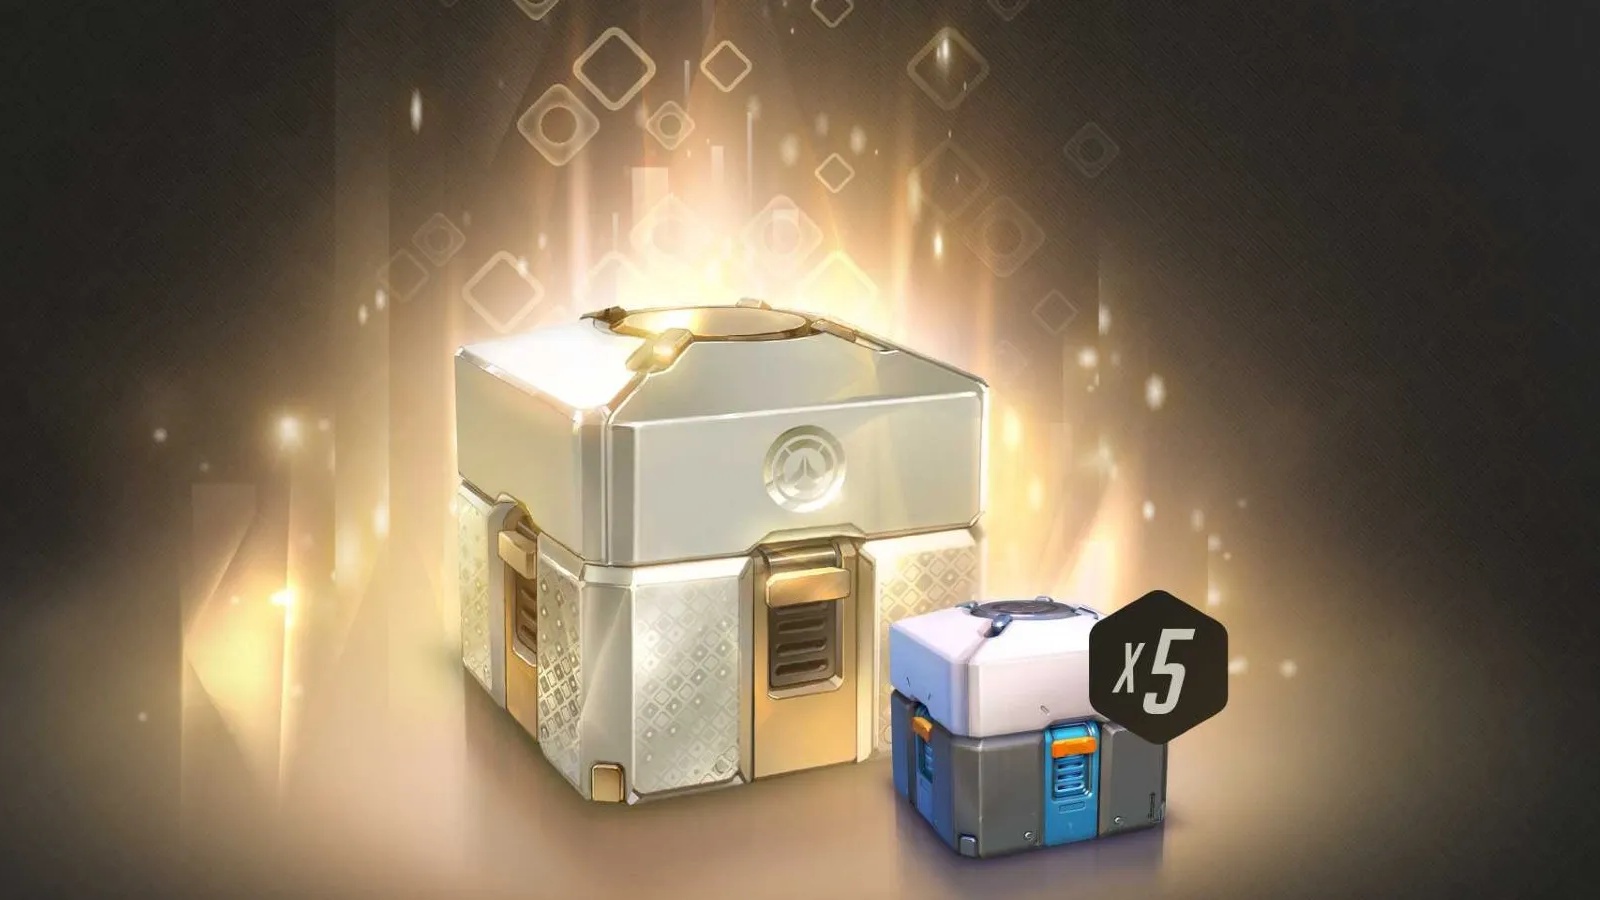 Overwatch 2 will get rid of loot boxes - The Verge